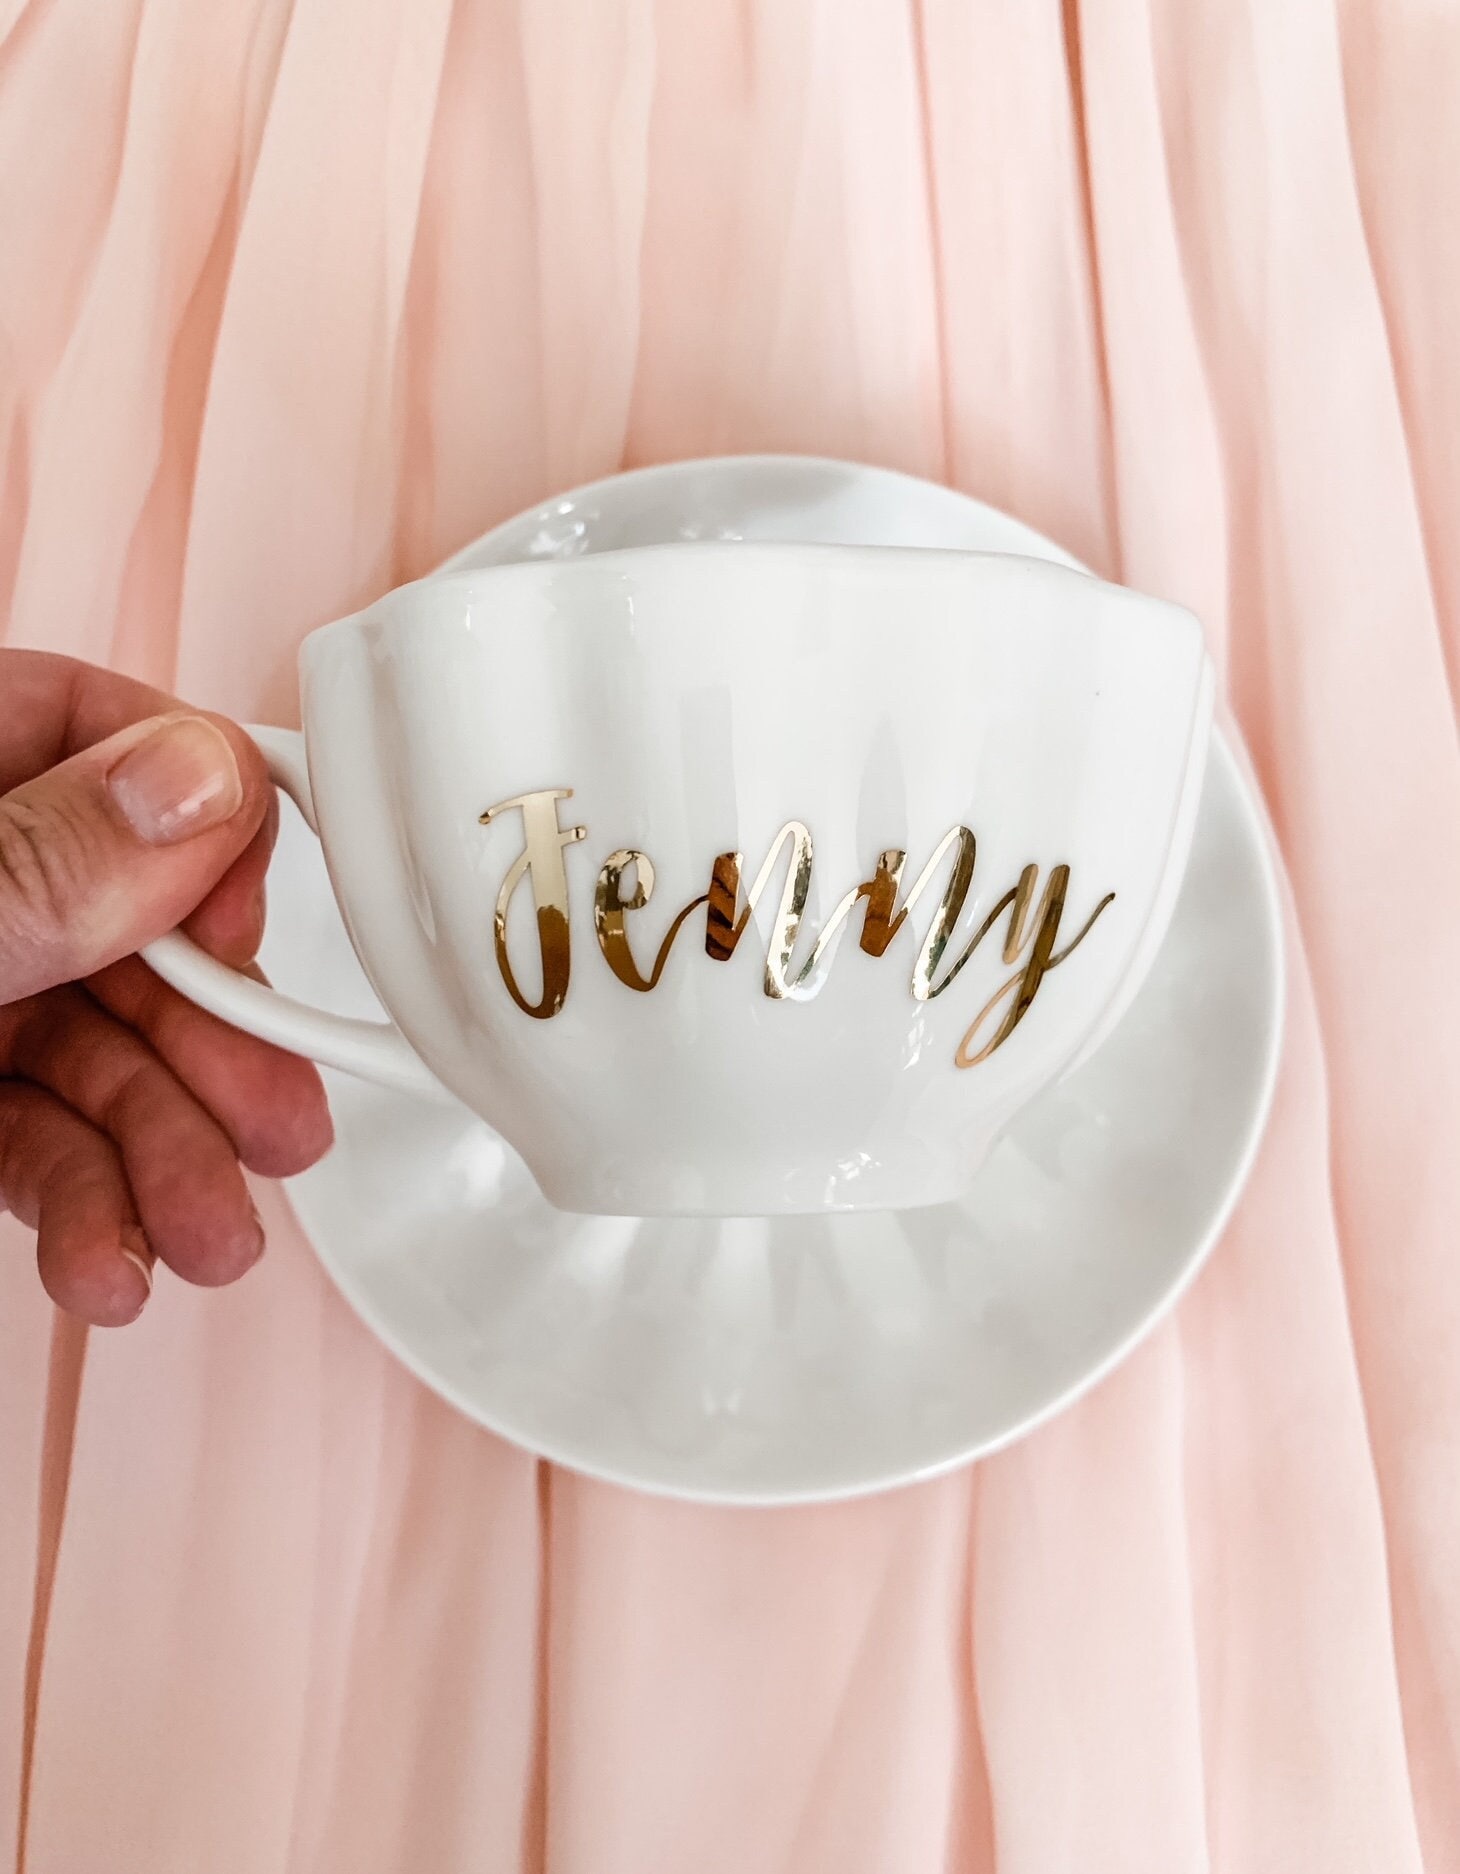 Personalized Tea Cups. Custom Printed Tea Cups And Saucers.